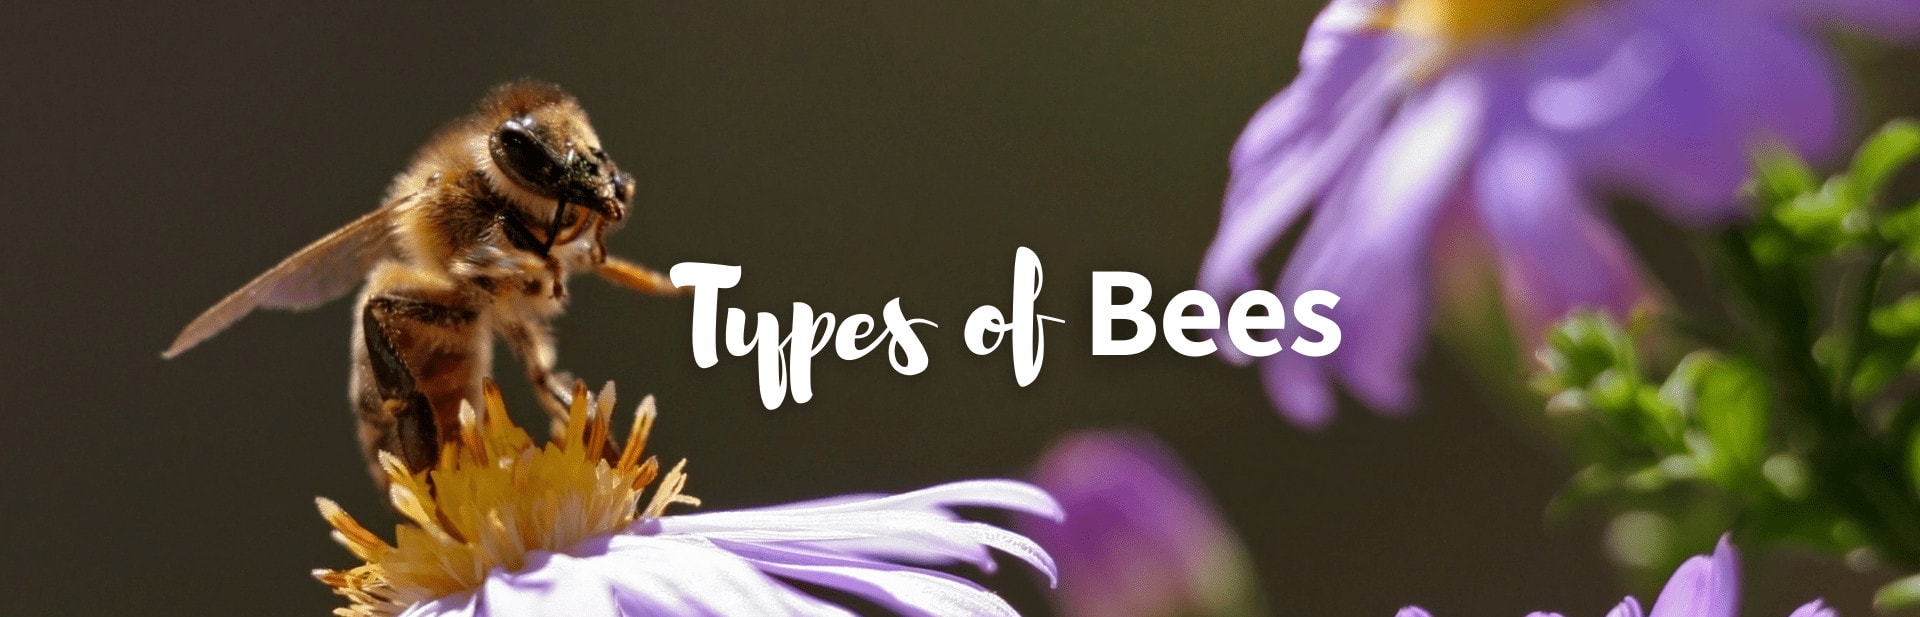 16+ Different Types Of Bees: Field Guide with Facts, Pictures and More